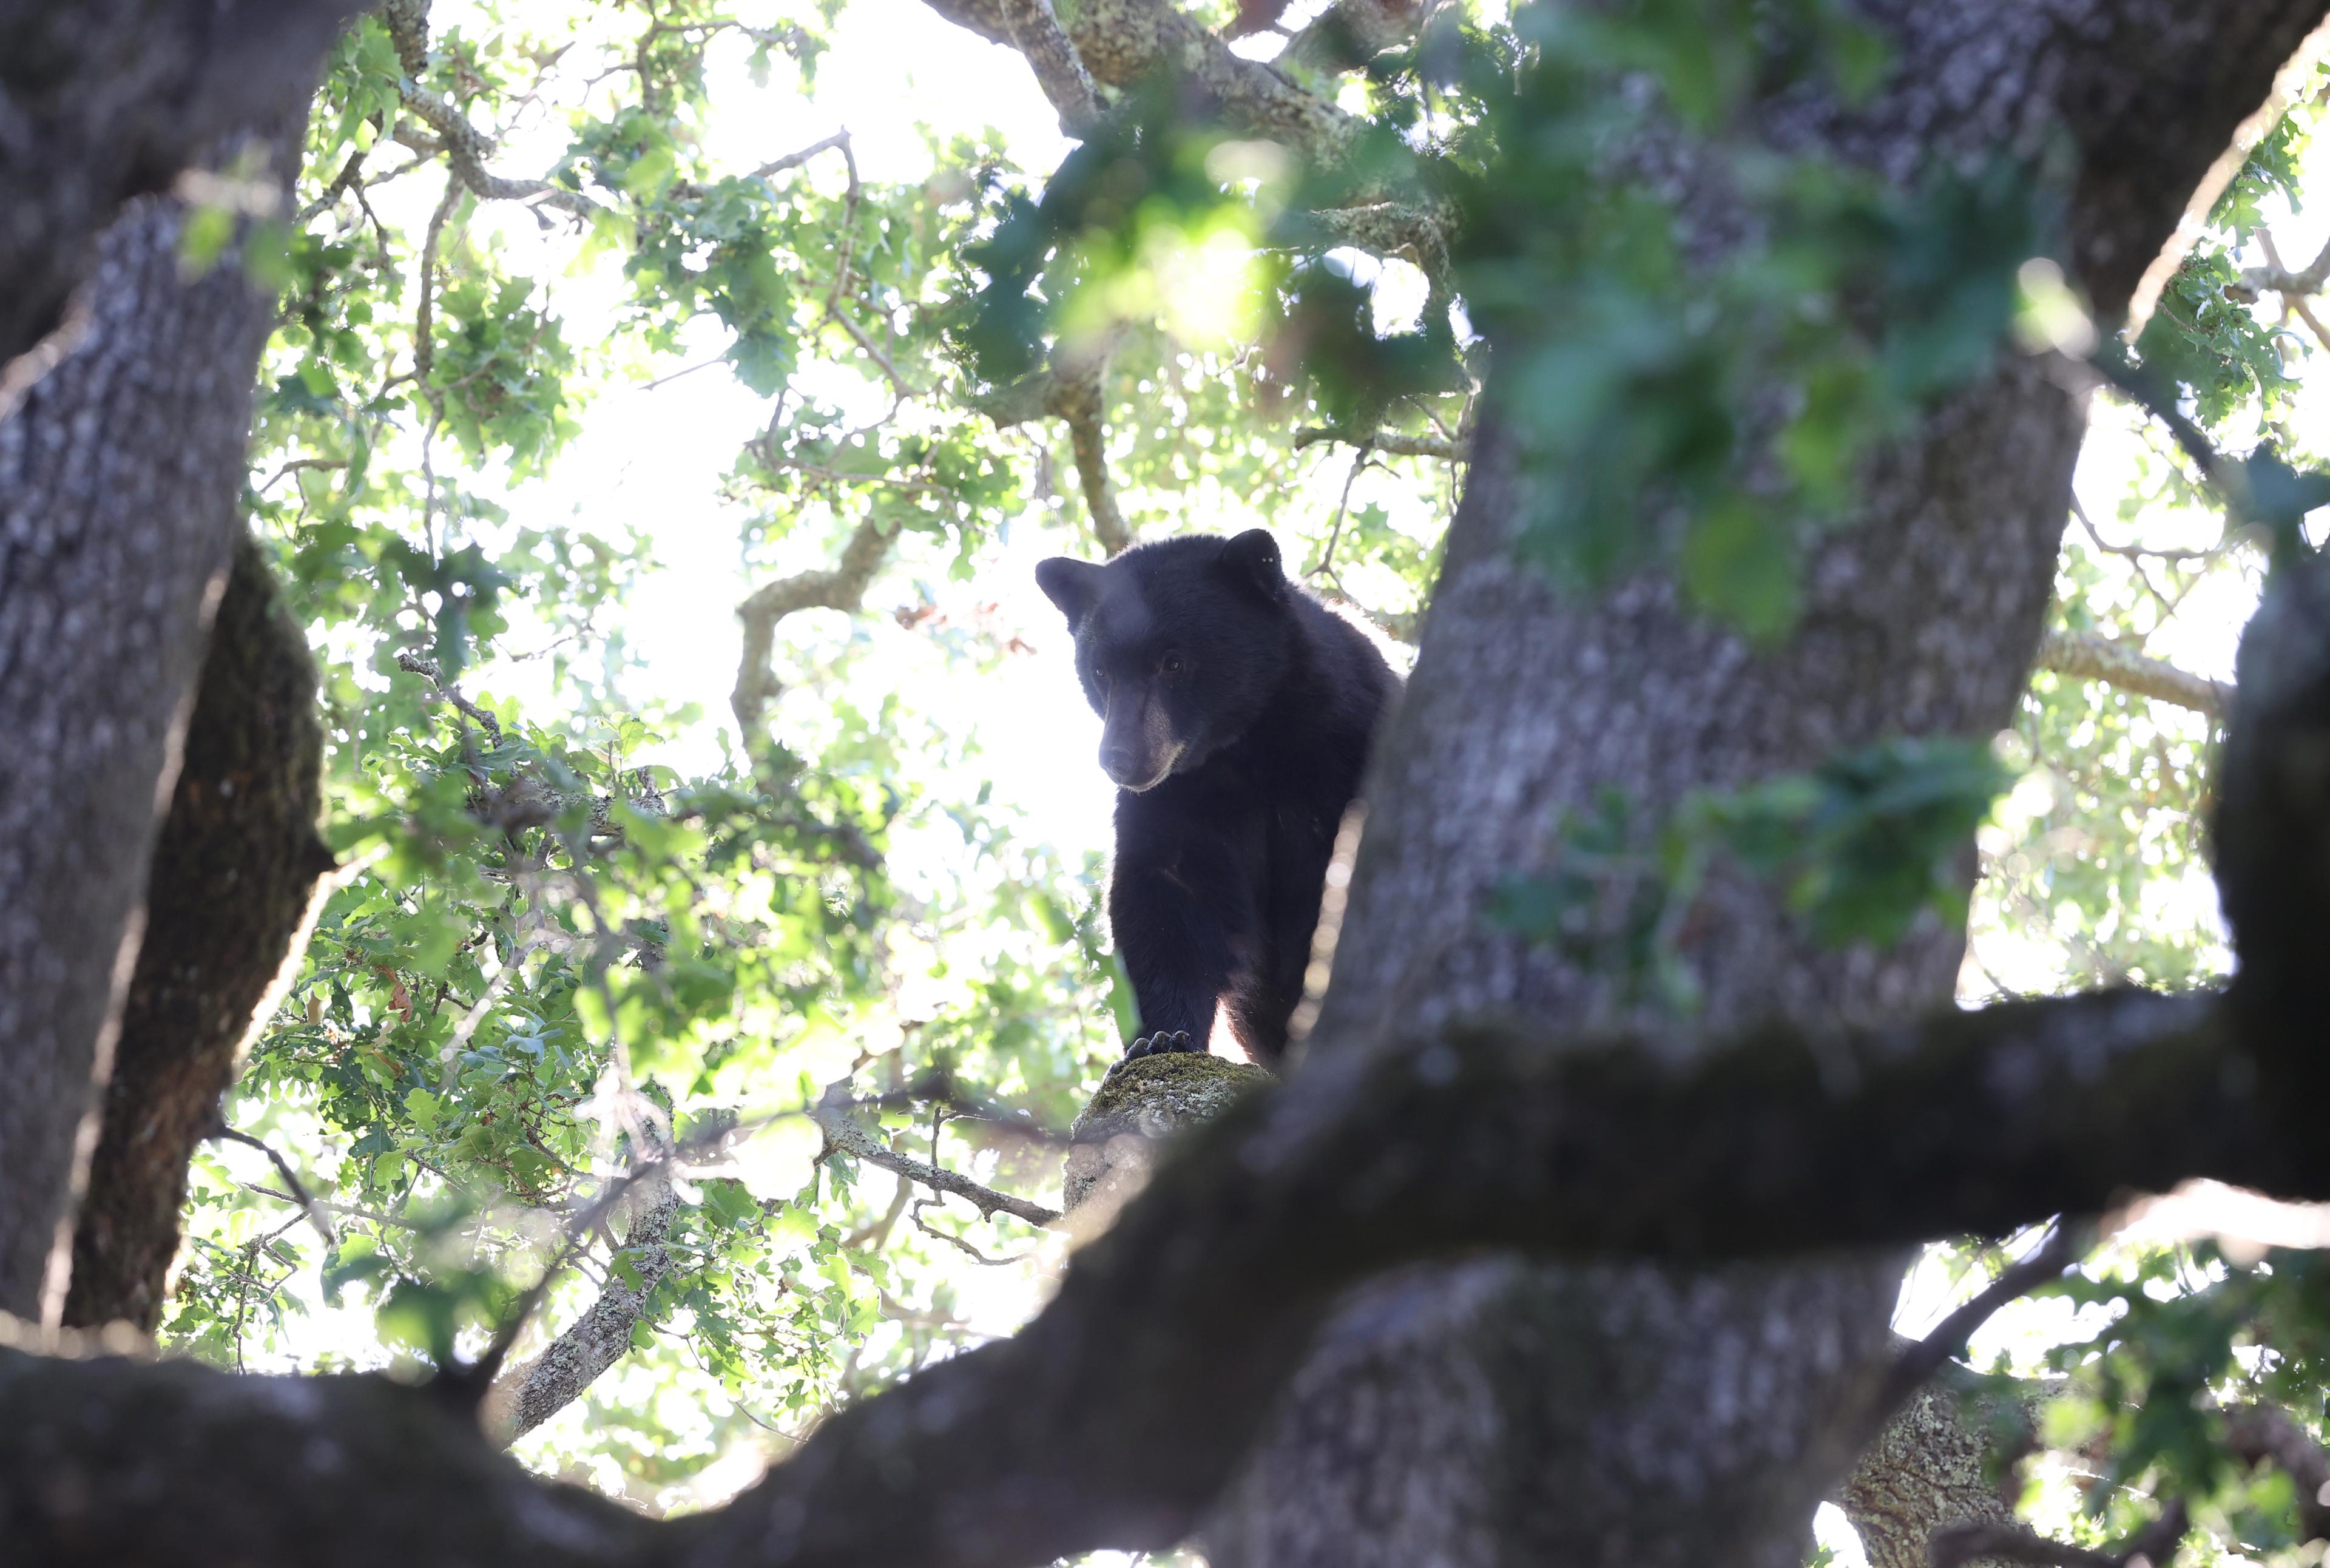 Bear in Chatsworth Caught After Hiding in Tree